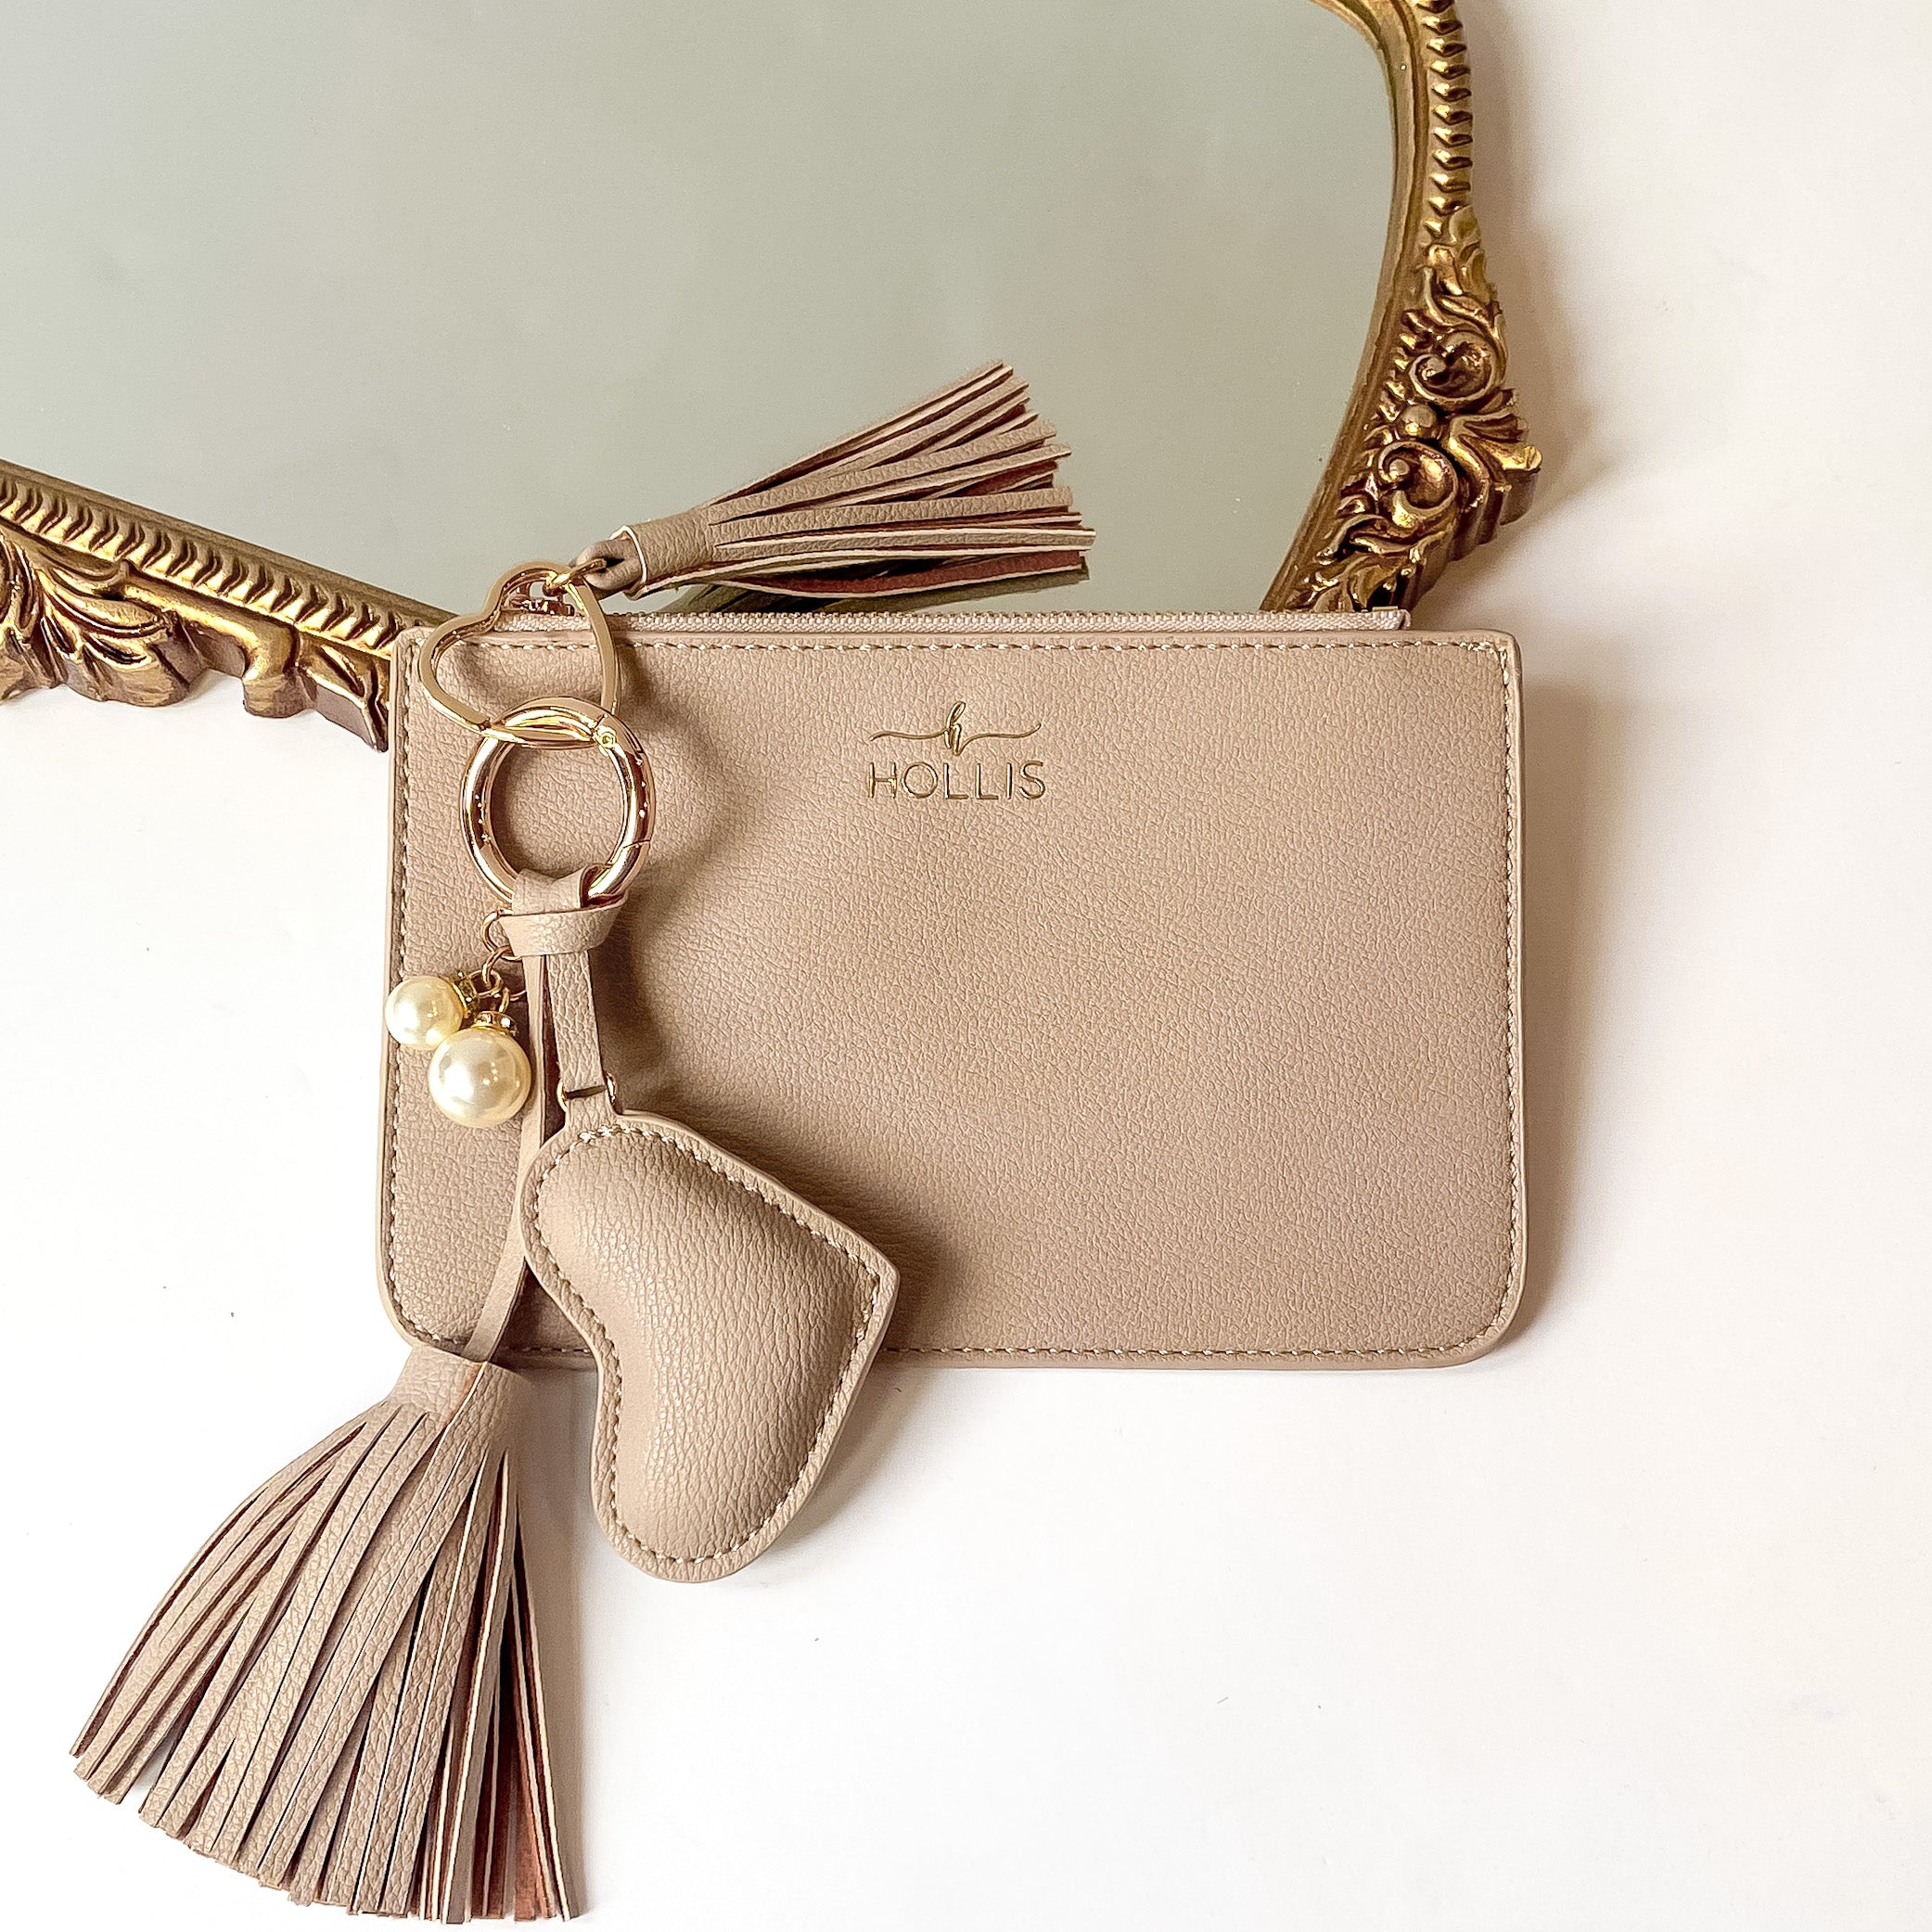 Nude coin pouch with a gold HOLLIS emblem at the top and a top zipper. This coin pouch has a gold key ring, gold heart key ring, a nude tassel charm, a nude heart charm and white pearl charms. This luggage tag is pictured partially laying on a gold mirror on a white background. 